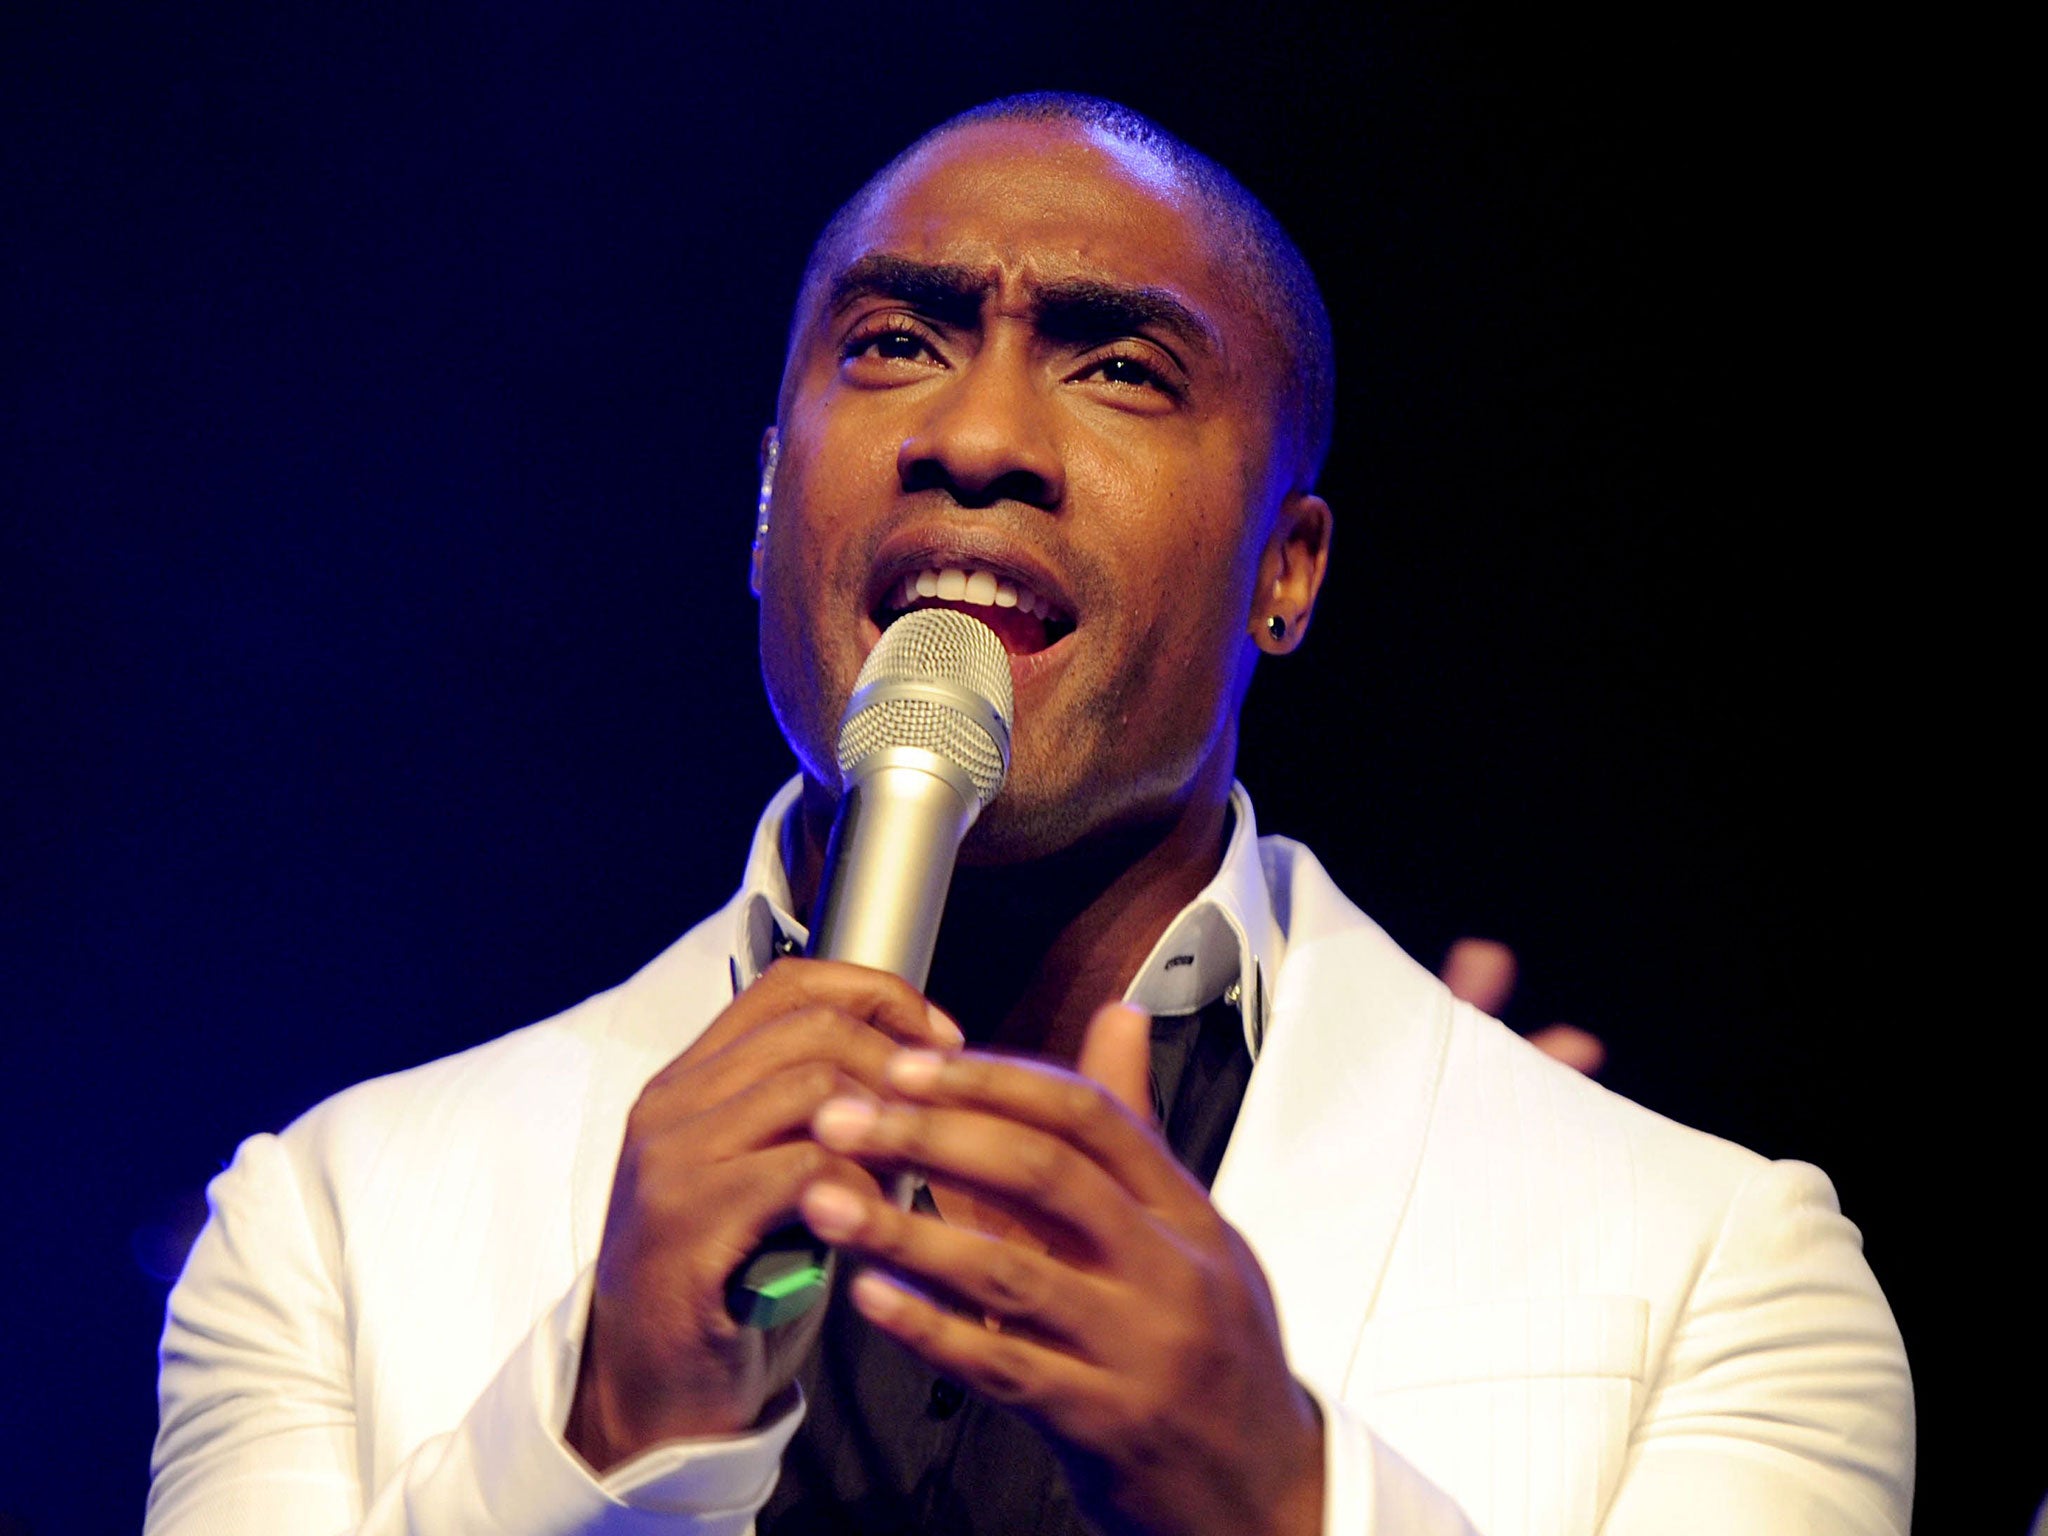 Blue singer Simon Webbe will be confirmed for Strictly Come Dancing